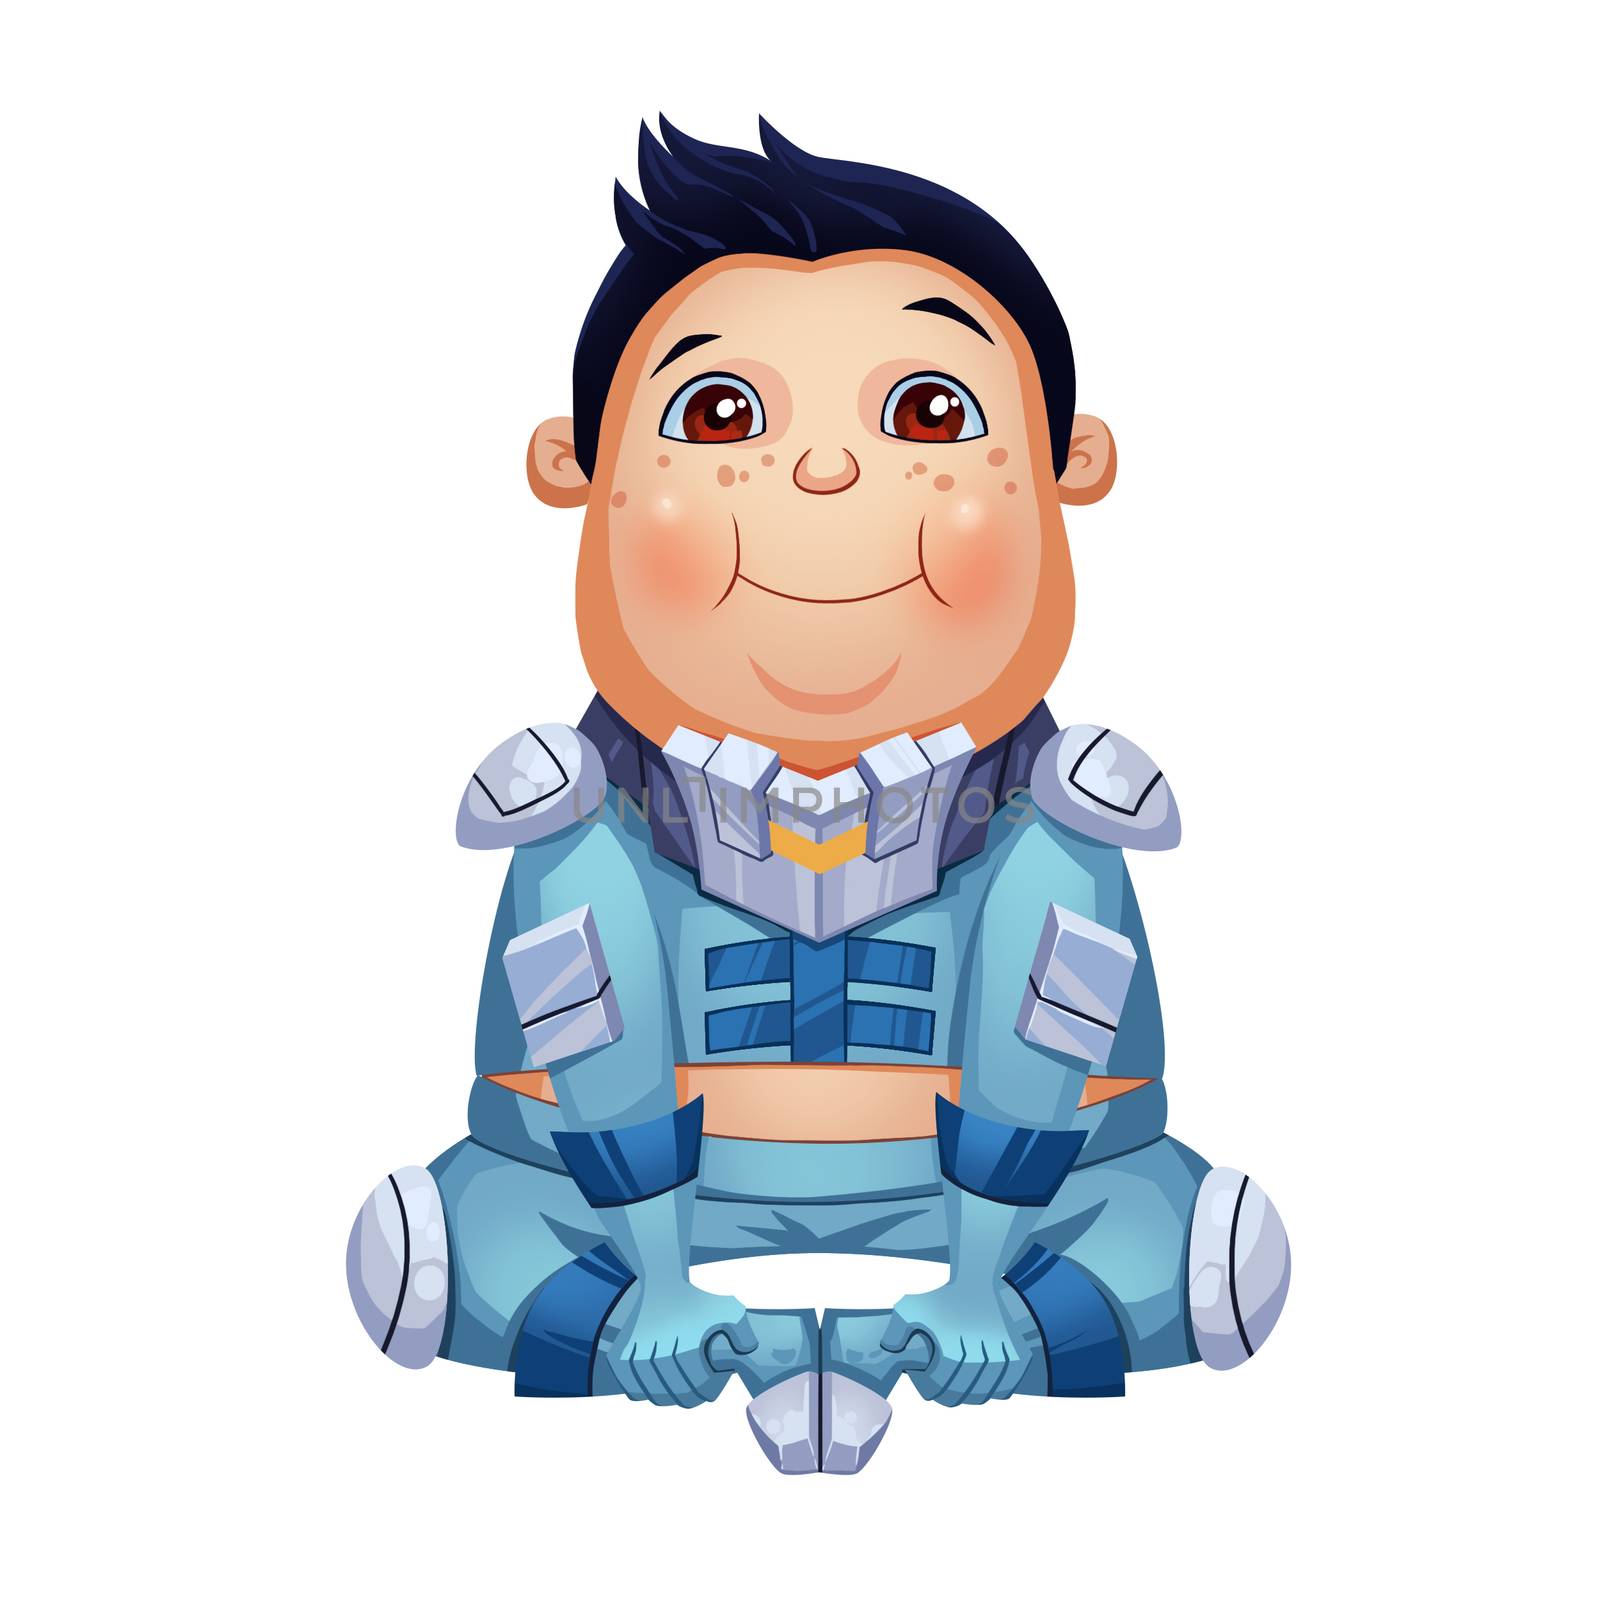 Illustration: This Fat Boy sitting on the ground, nickname "The King", member of Tramp Boy Scouts, a Space Pirates Team. Character Design. Cartoon / Sci-Fi Style